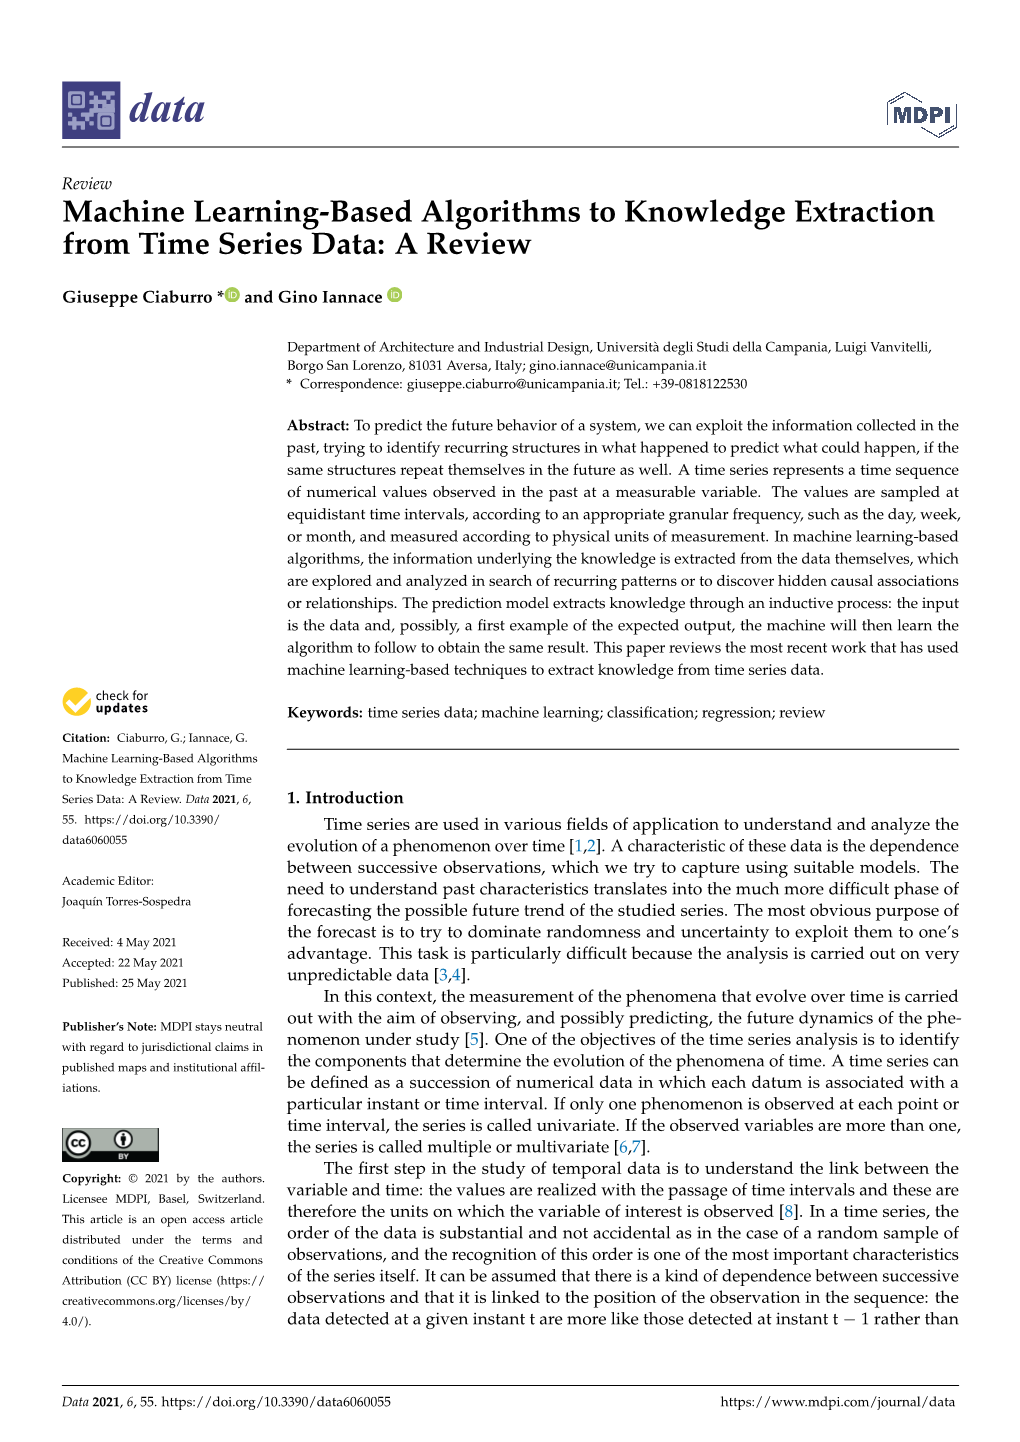 Machine Learning-Based Algorithms to Knowledge Extraction from Time Series Data: a Review